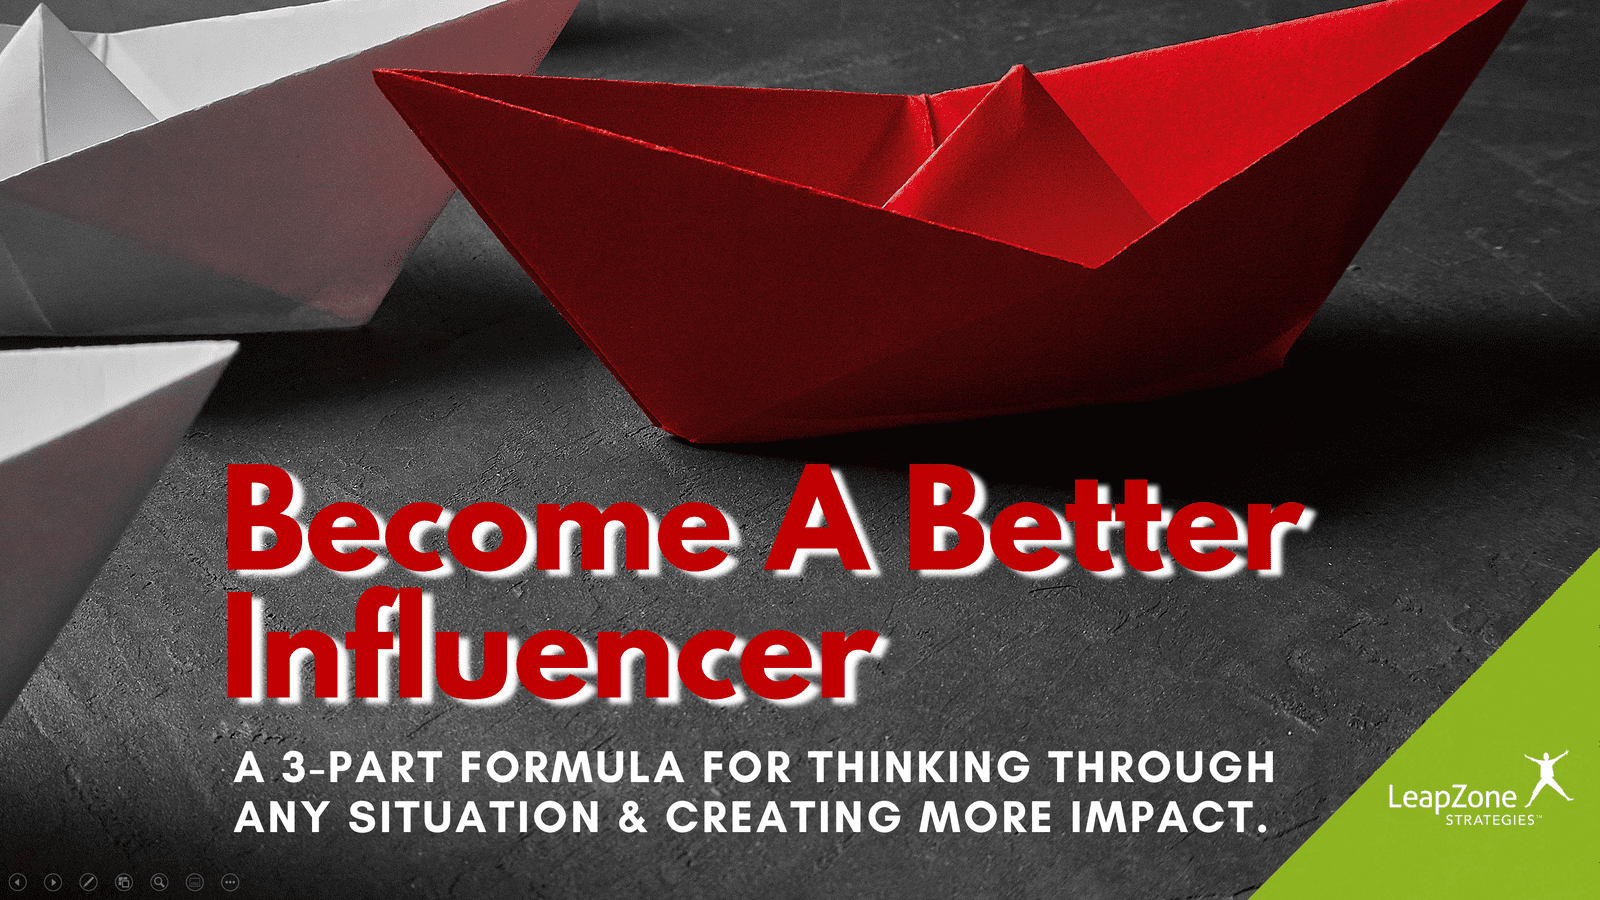 Become A Better Influencer With Isabelle Mercier